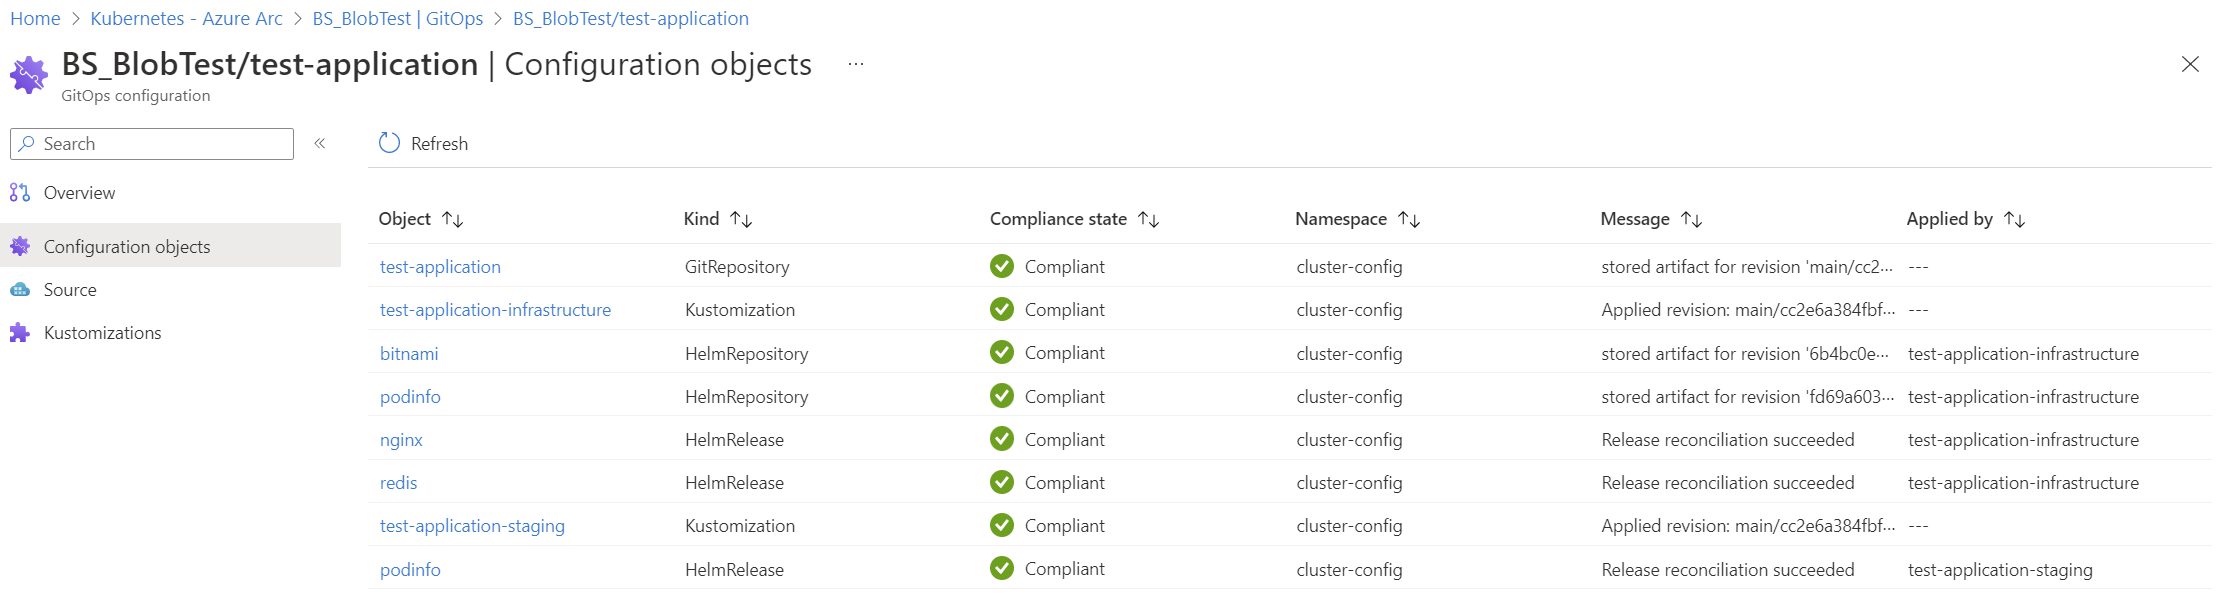 Screenshots showing configuration objects and their state in the Azure portal.